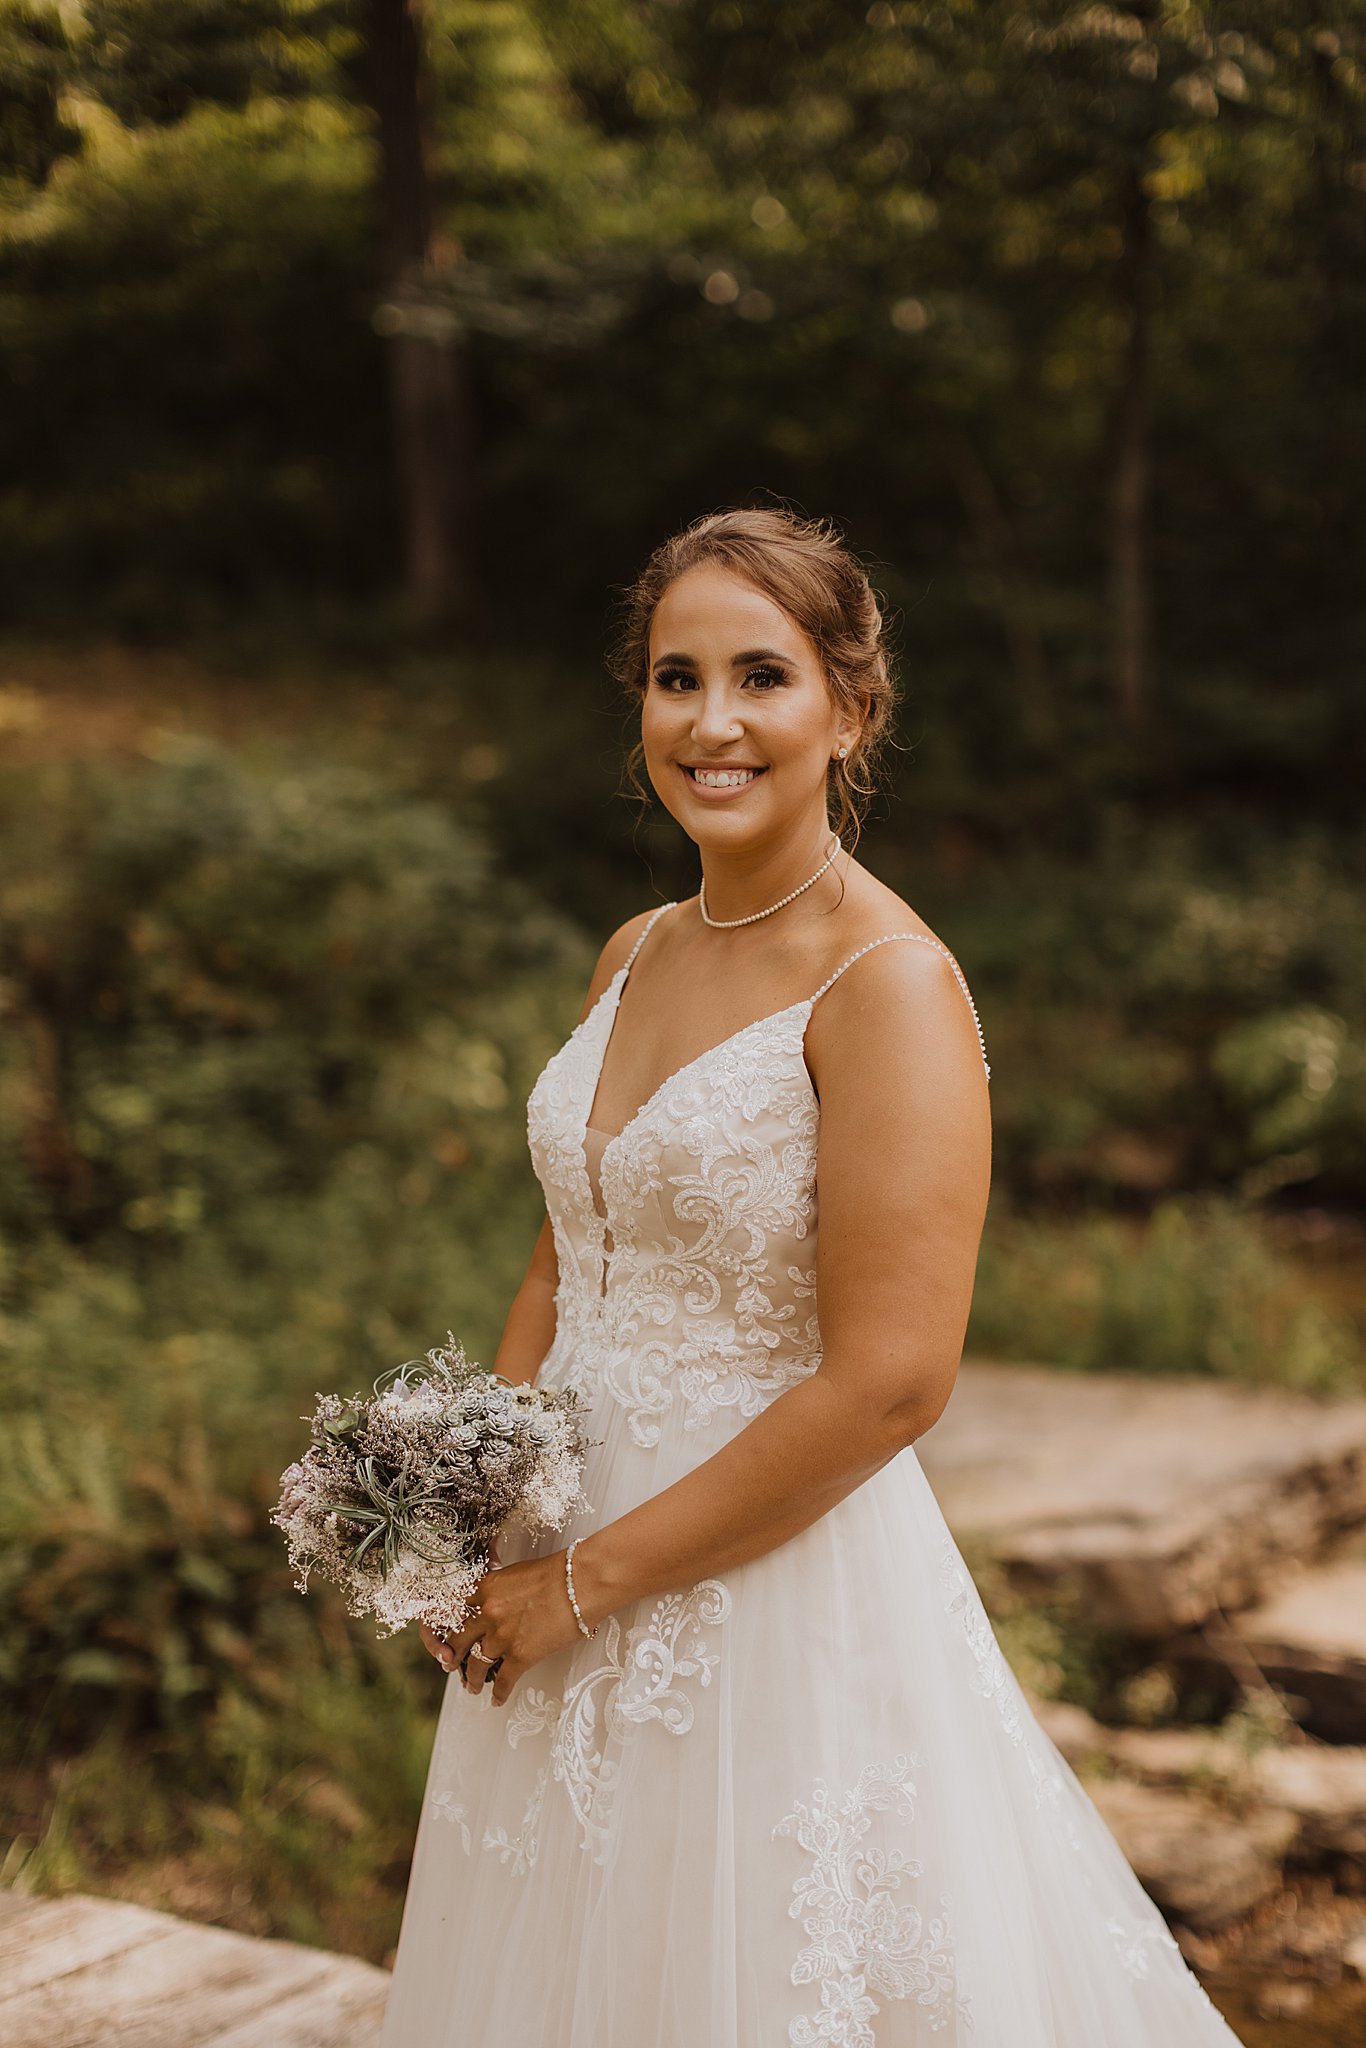 Bride with beautiful dried bouquet